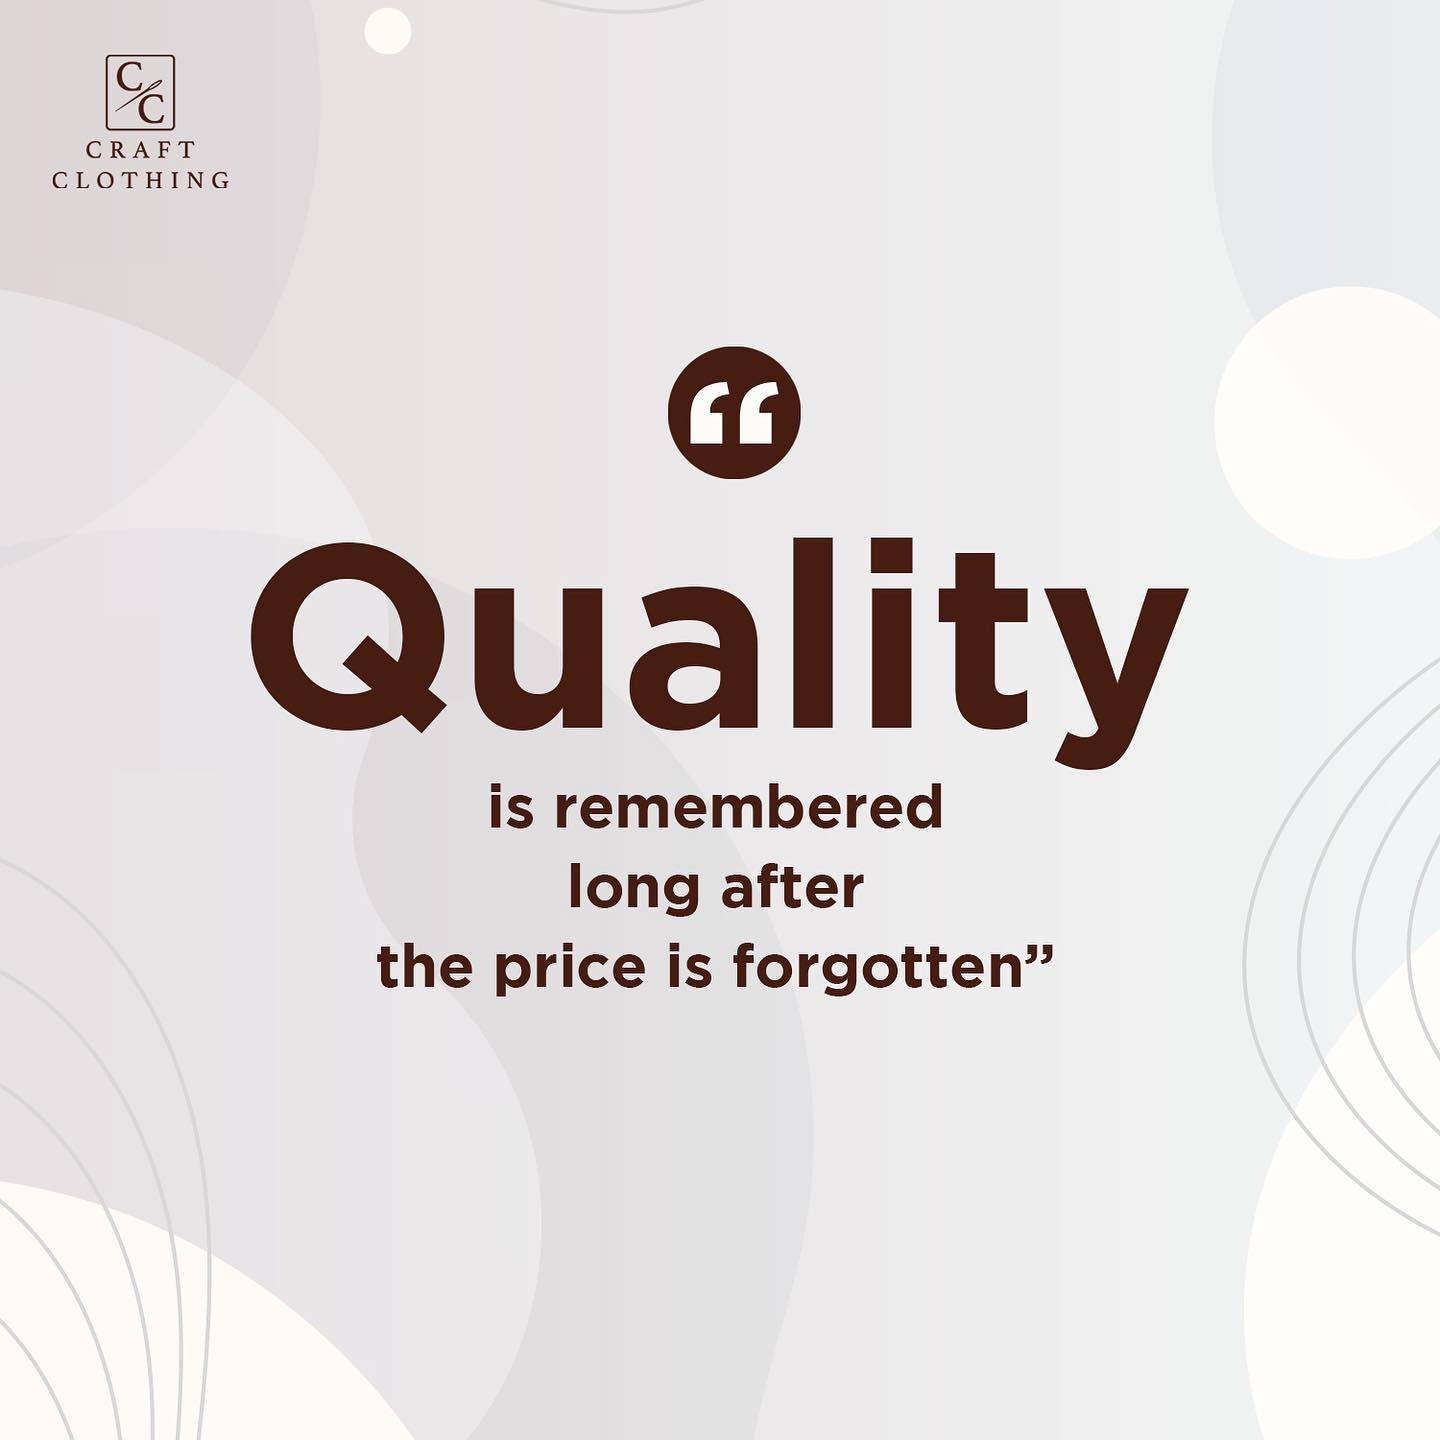 Quality is remembered long after the price is forgotten